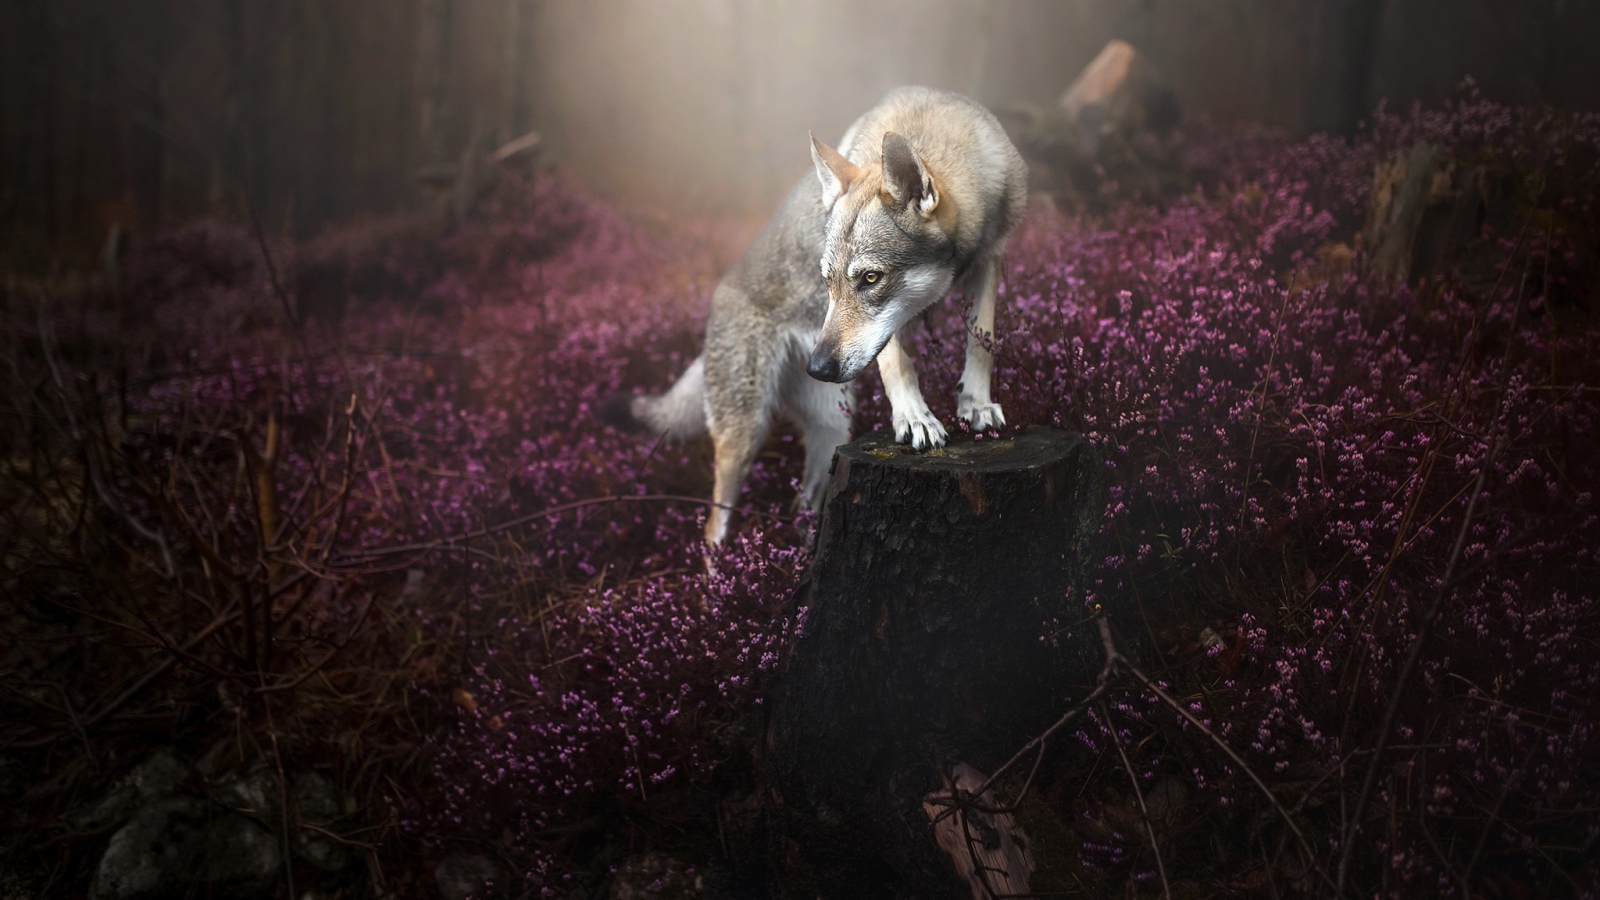 Severe sight of a gray wolf in a forest with purple flowers